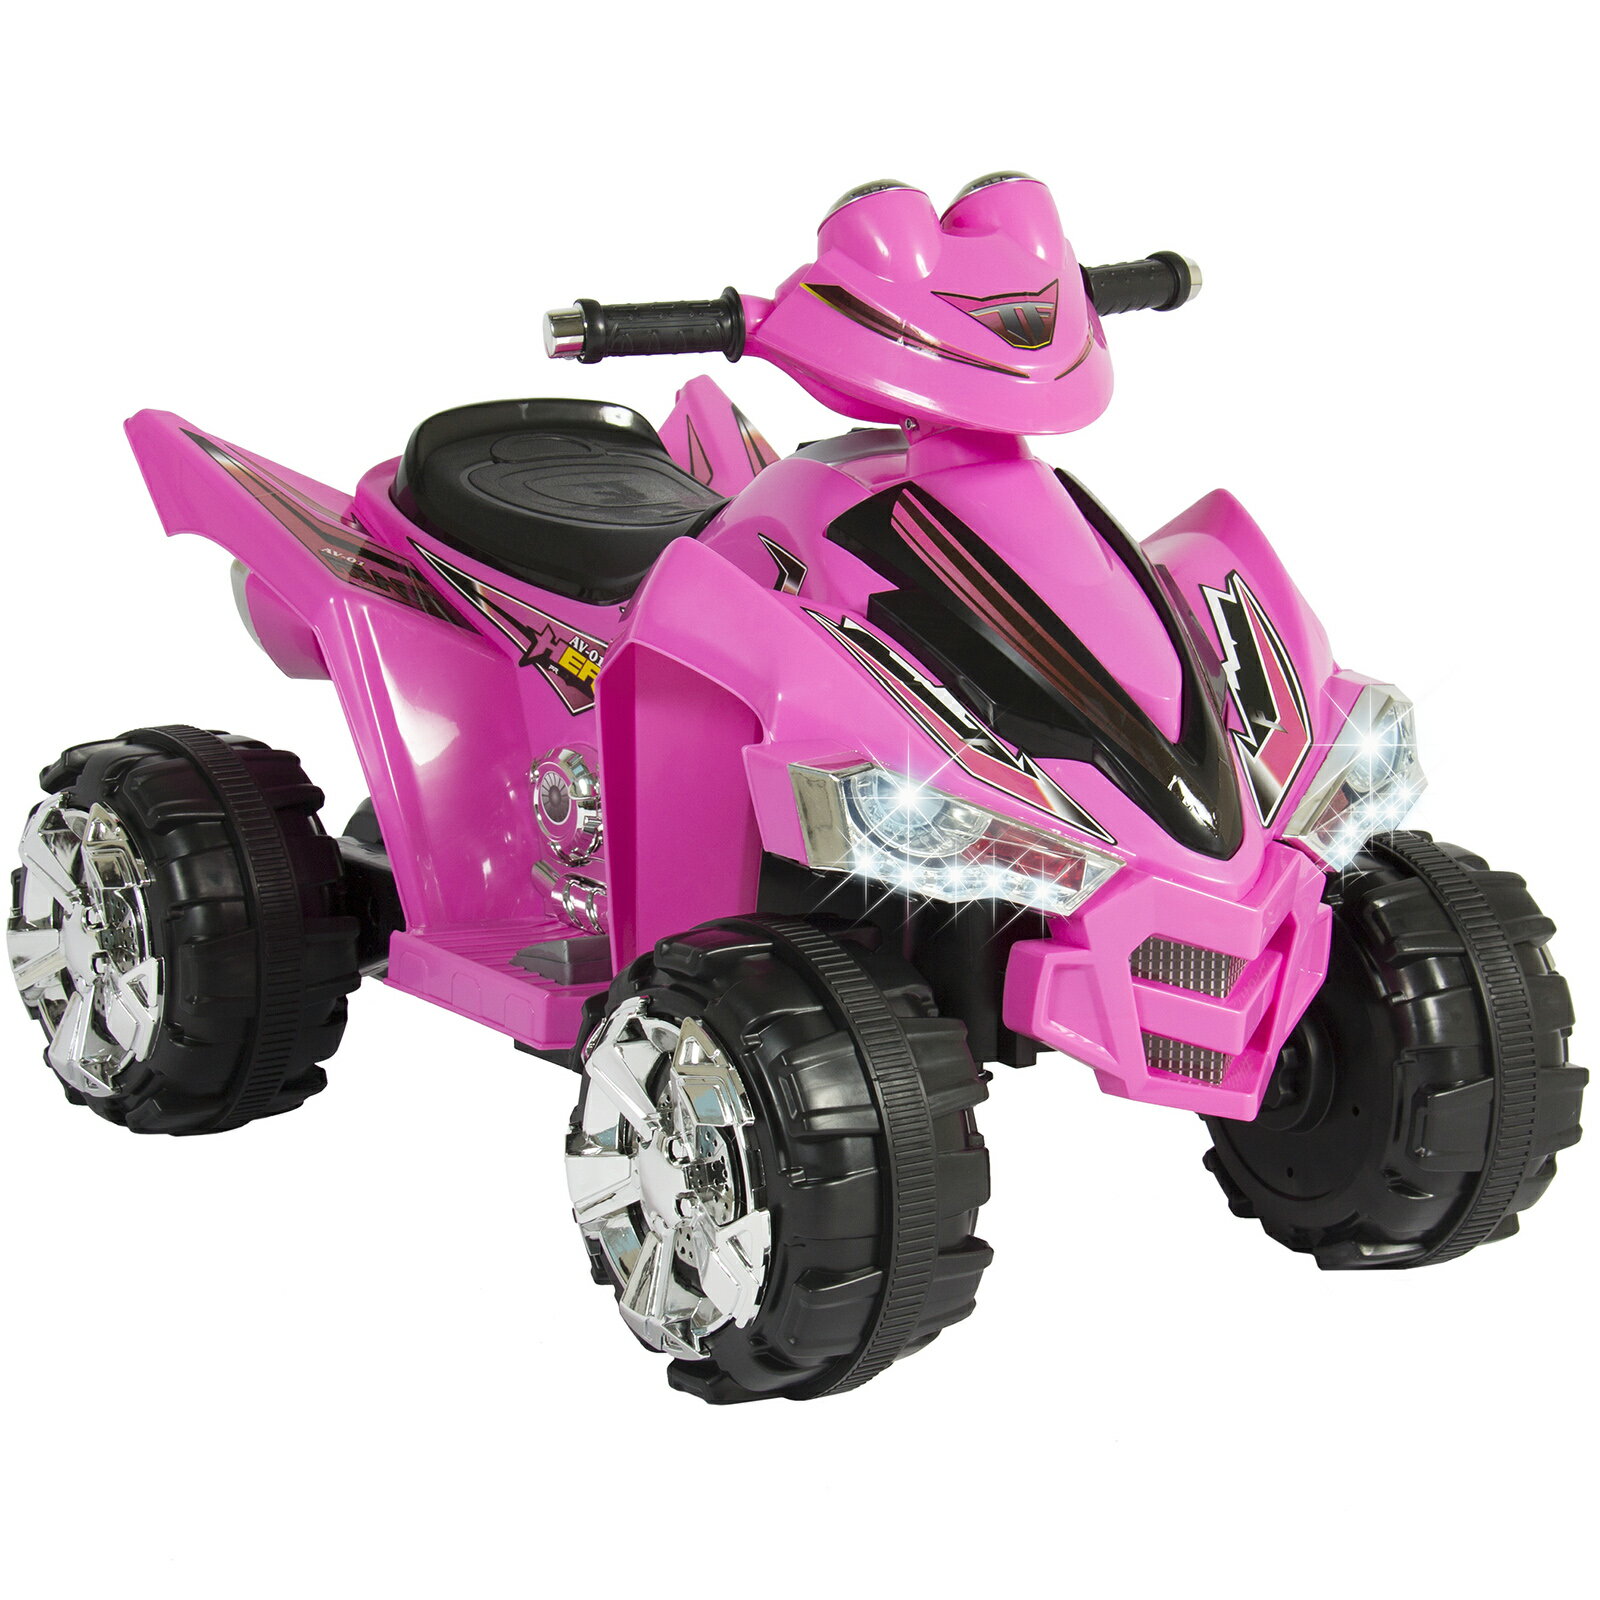 kids battery operated quad